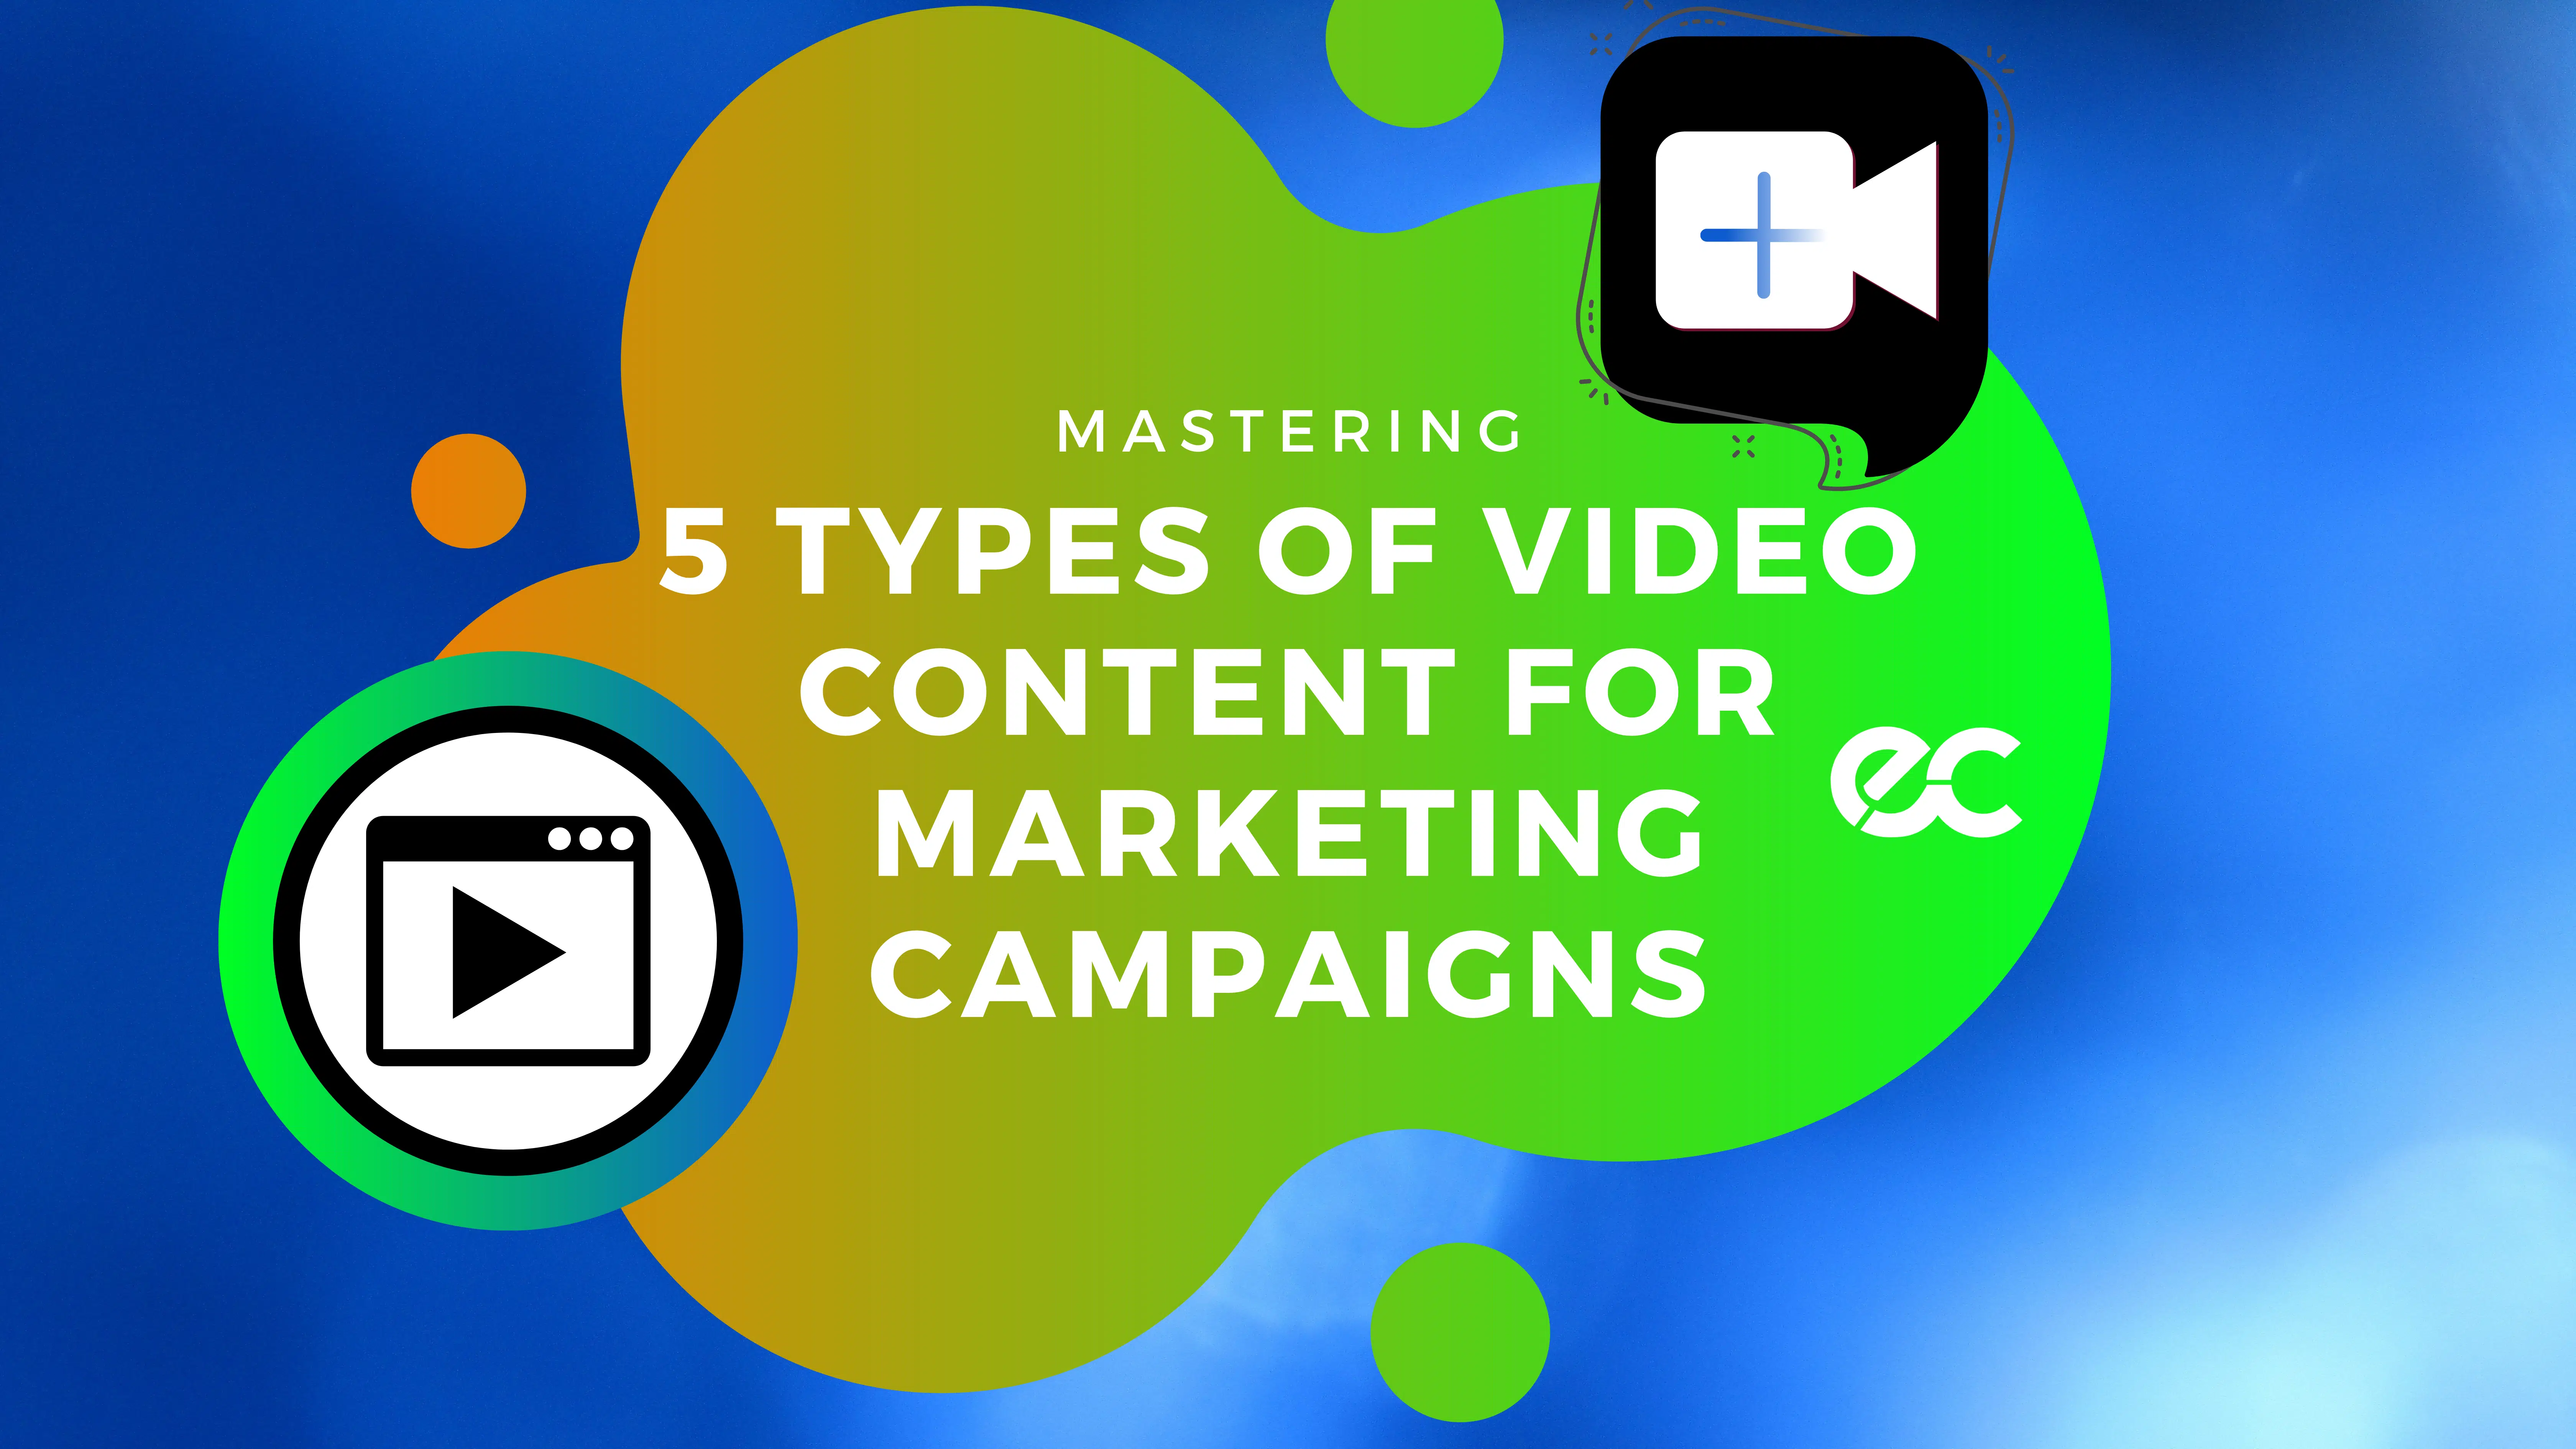 Mastering 5 Types of Video Content for marketing campaigns